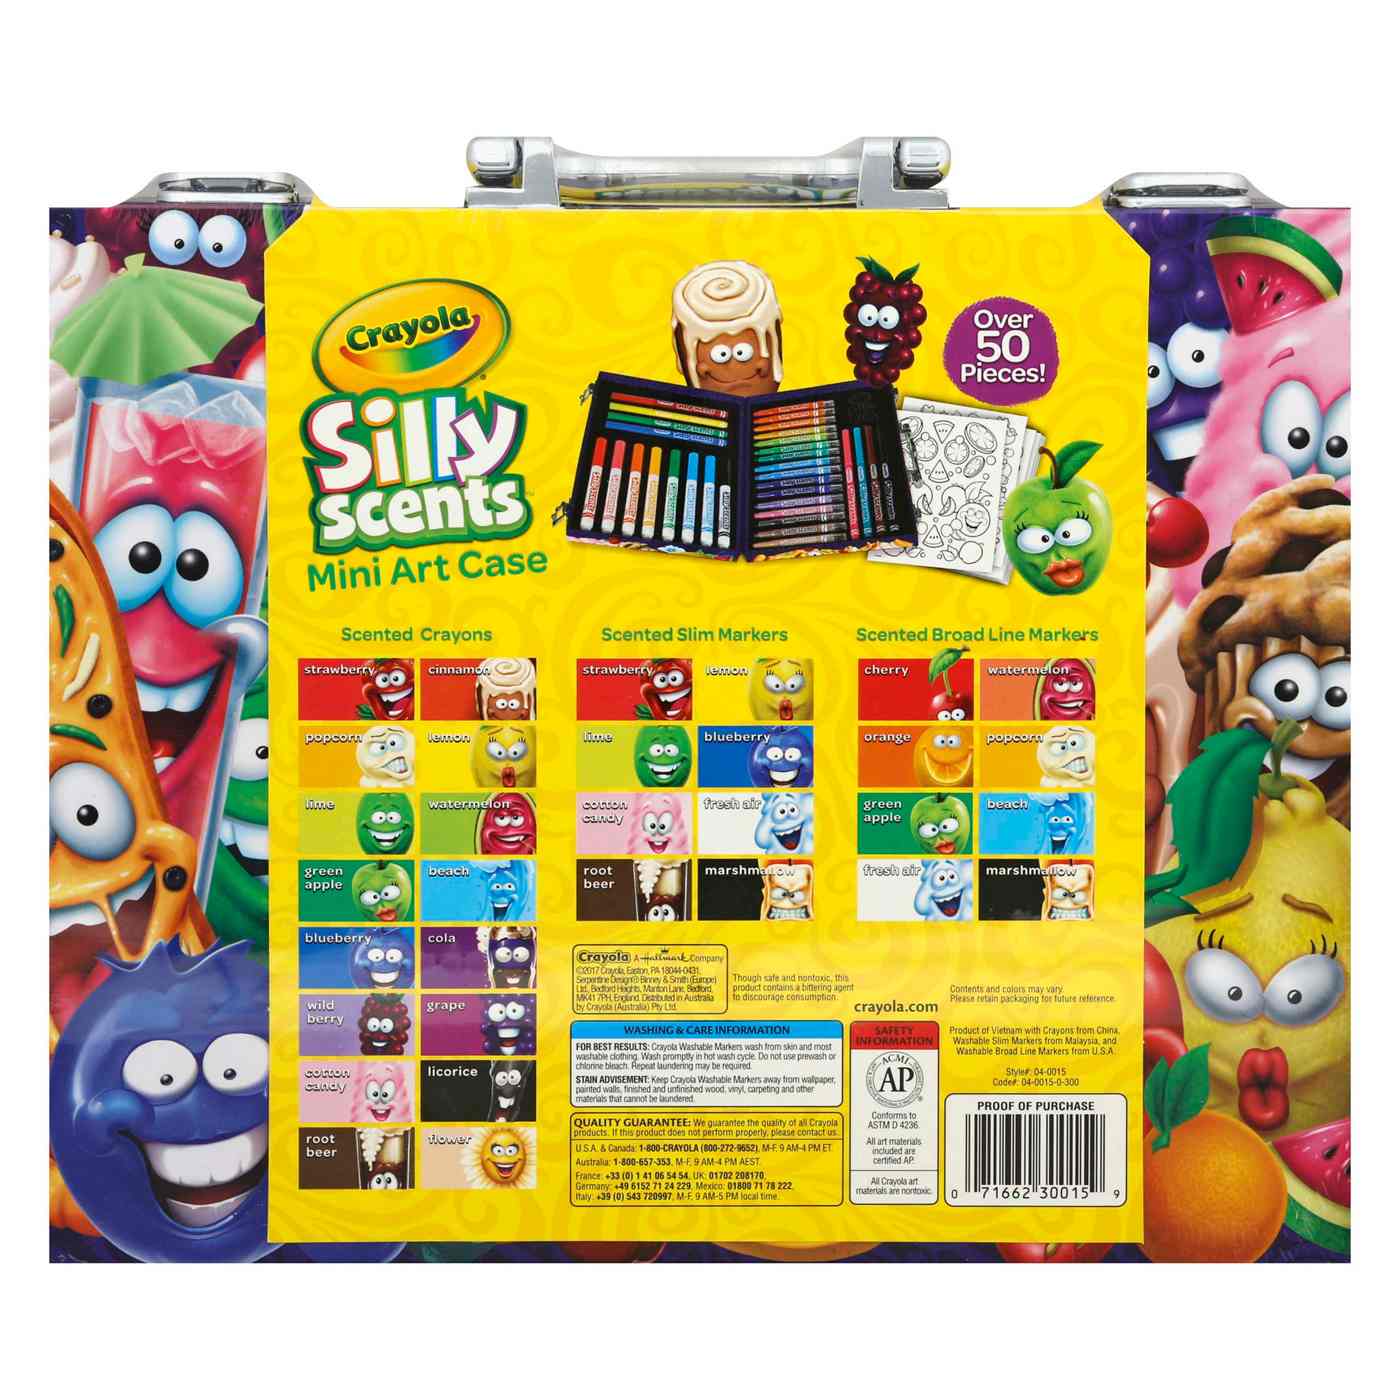 Crayola Silly Scents Mini Art Case; image 2 of 2